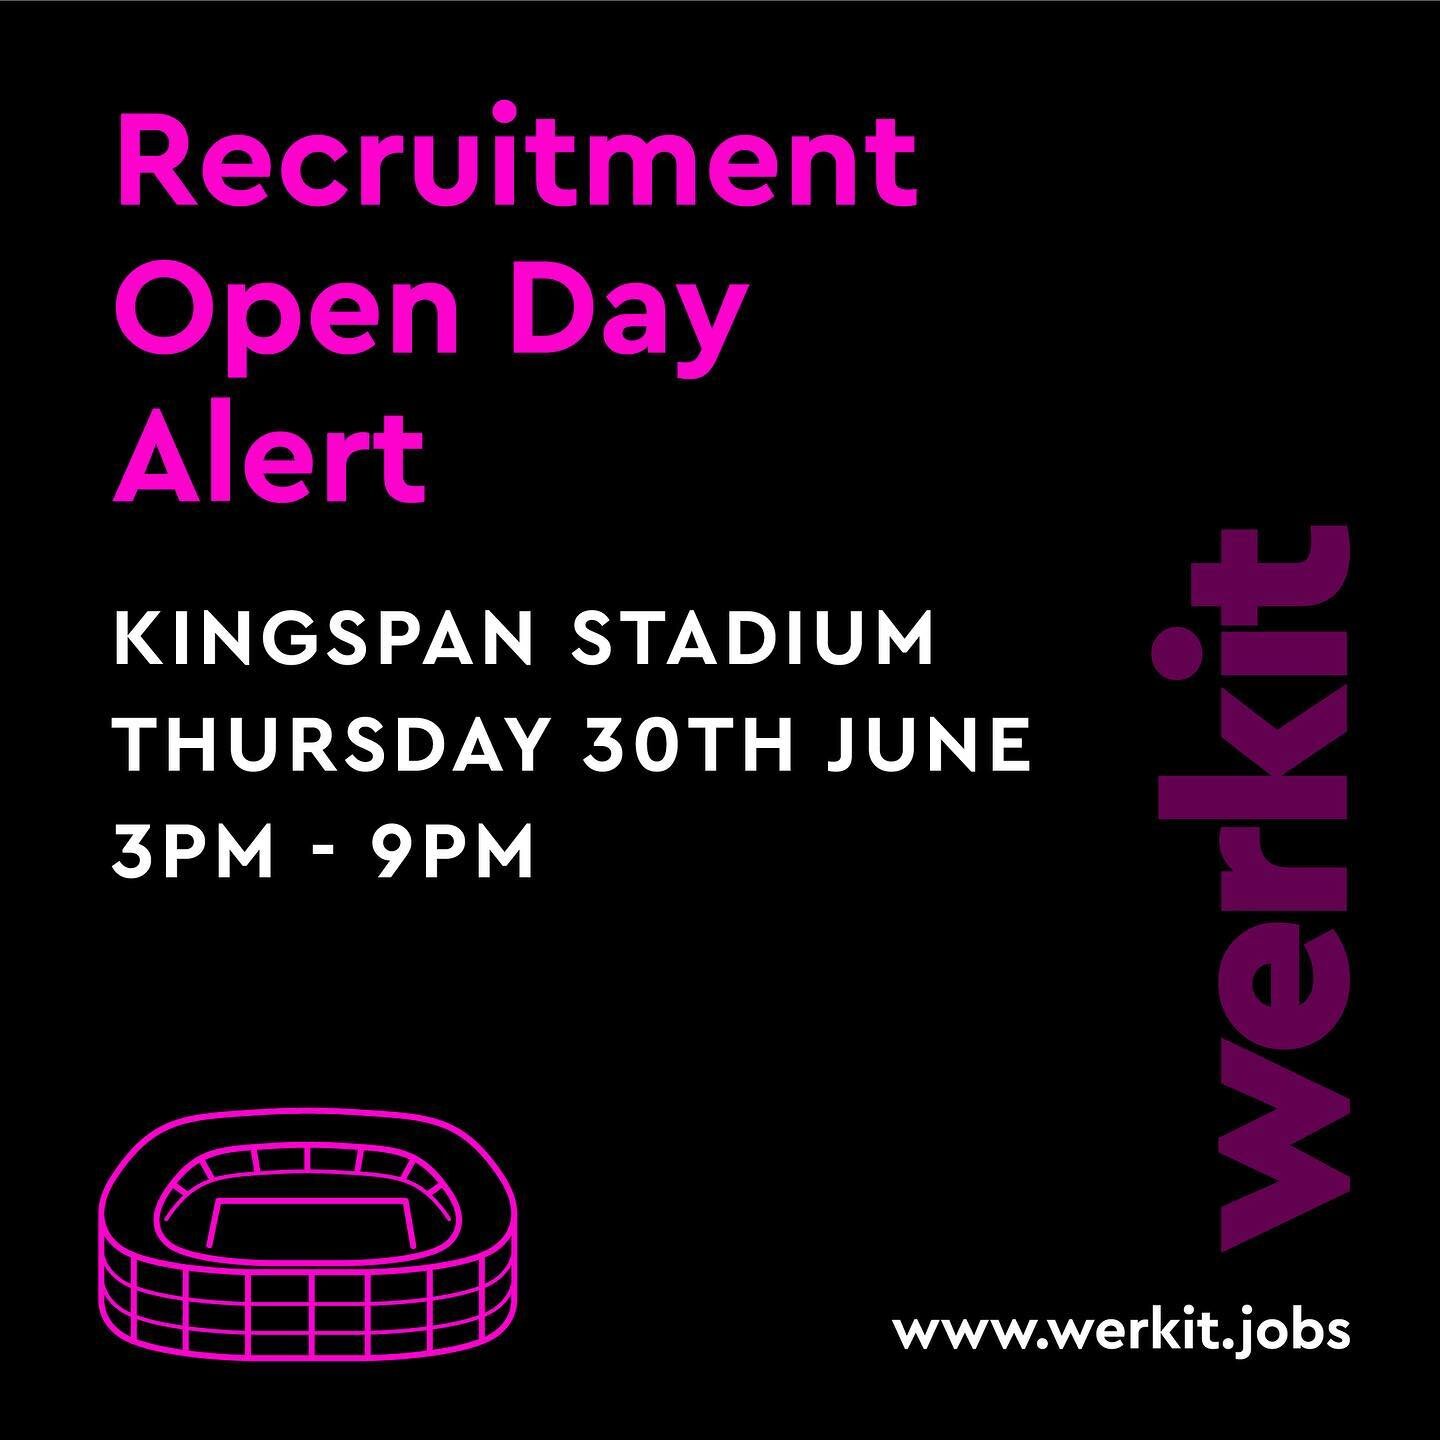 WERKIT Recruitment Open Day: Today! At The Kingspan Stadium Between 3-9pm 👍

Choose where &amp; when you work in NI's most iconic venues!🍺🍔

See more info &amp; sign up today: 
www.werkit.jobs 📱
hi@werkit.jobs 📧

#werkit #jobsni #hiringni #recru